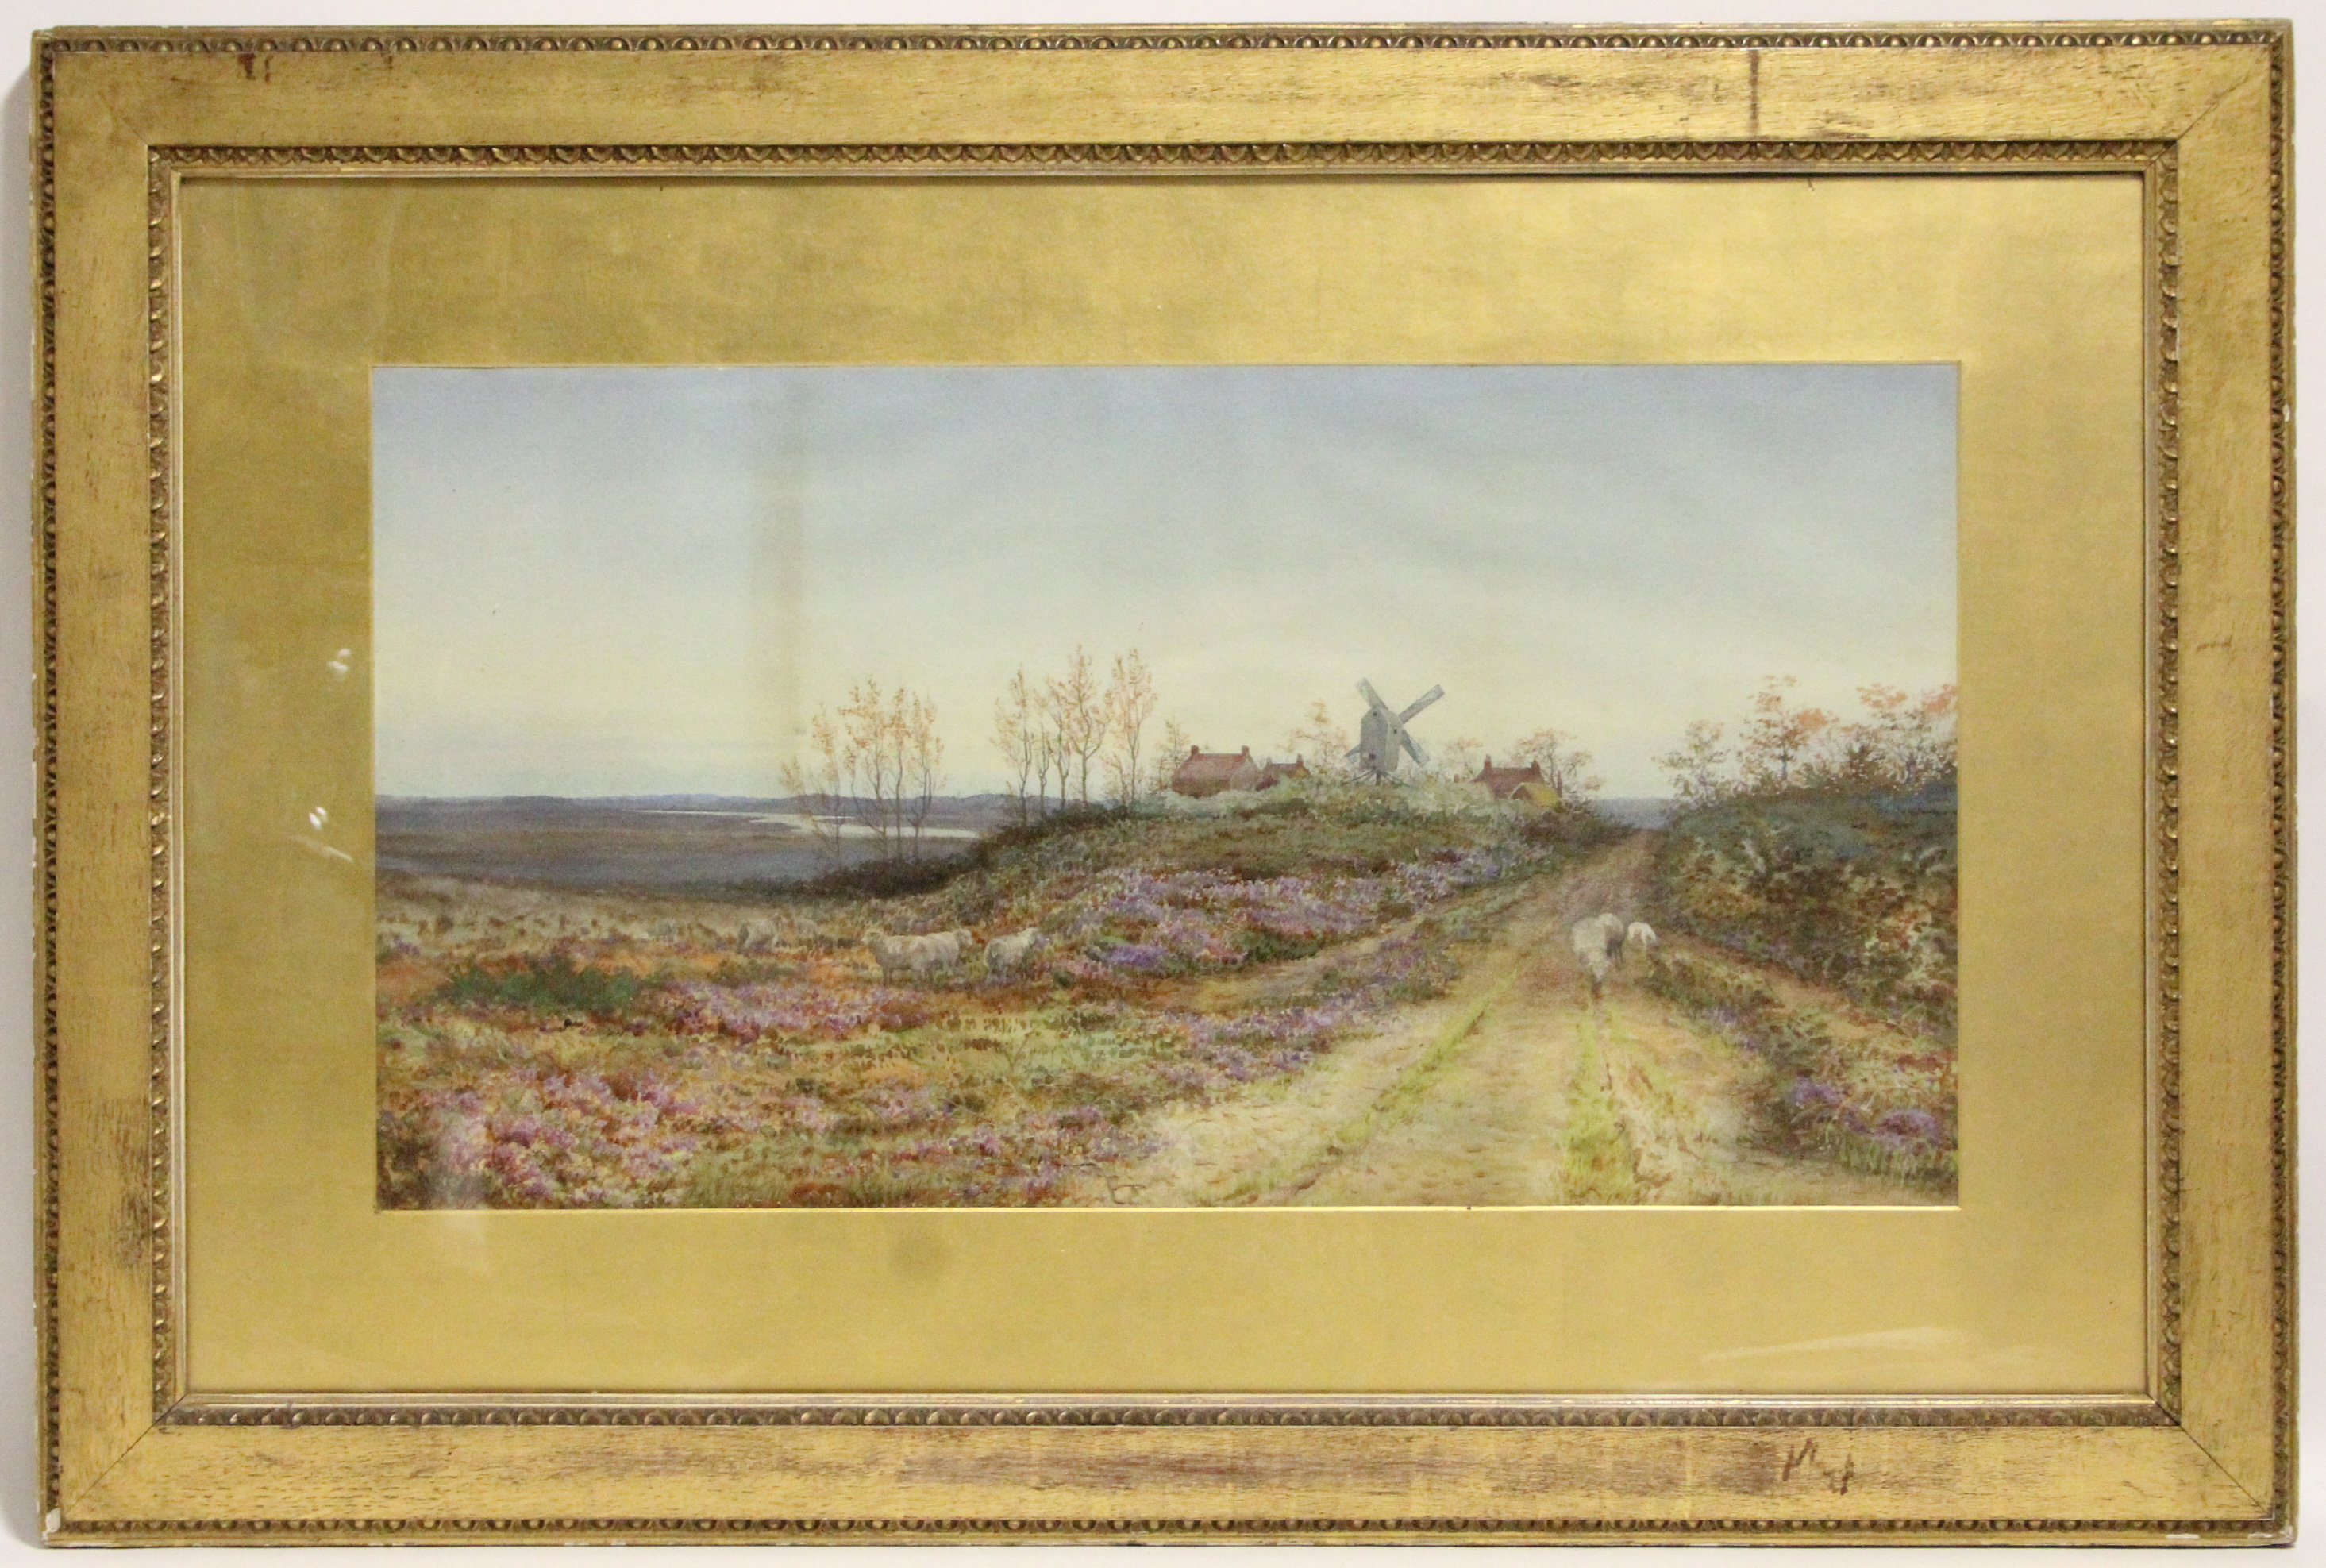 JAMES WHITTET SMITH (19th century). Titled: “A Corner of Snape Common, near Aldeburgh, Suffolk”.